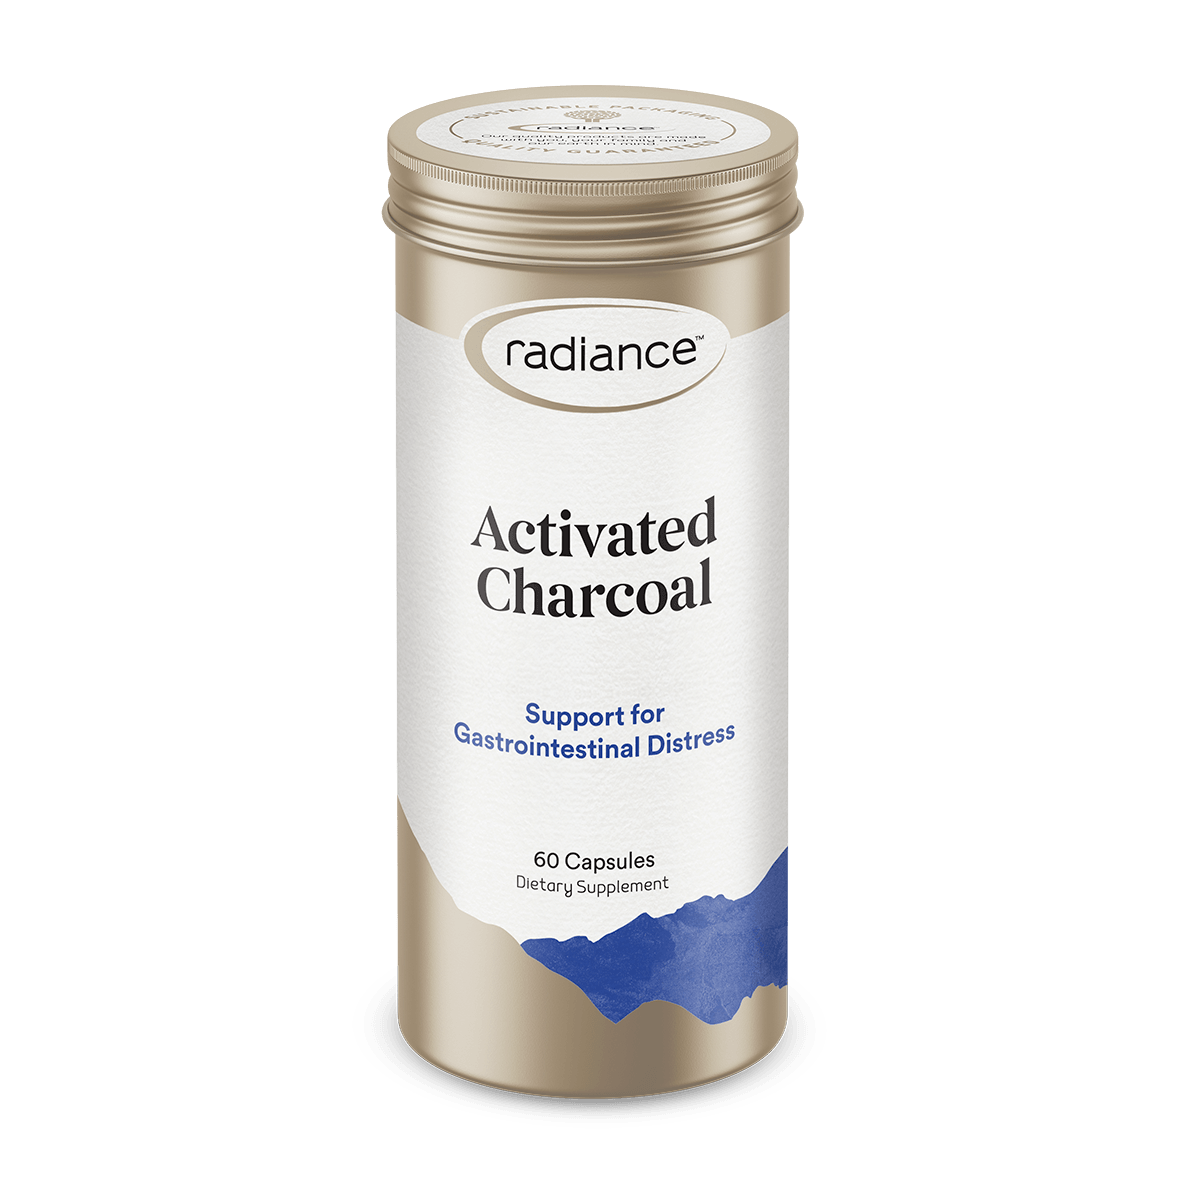 Radiance Activated Charcoal